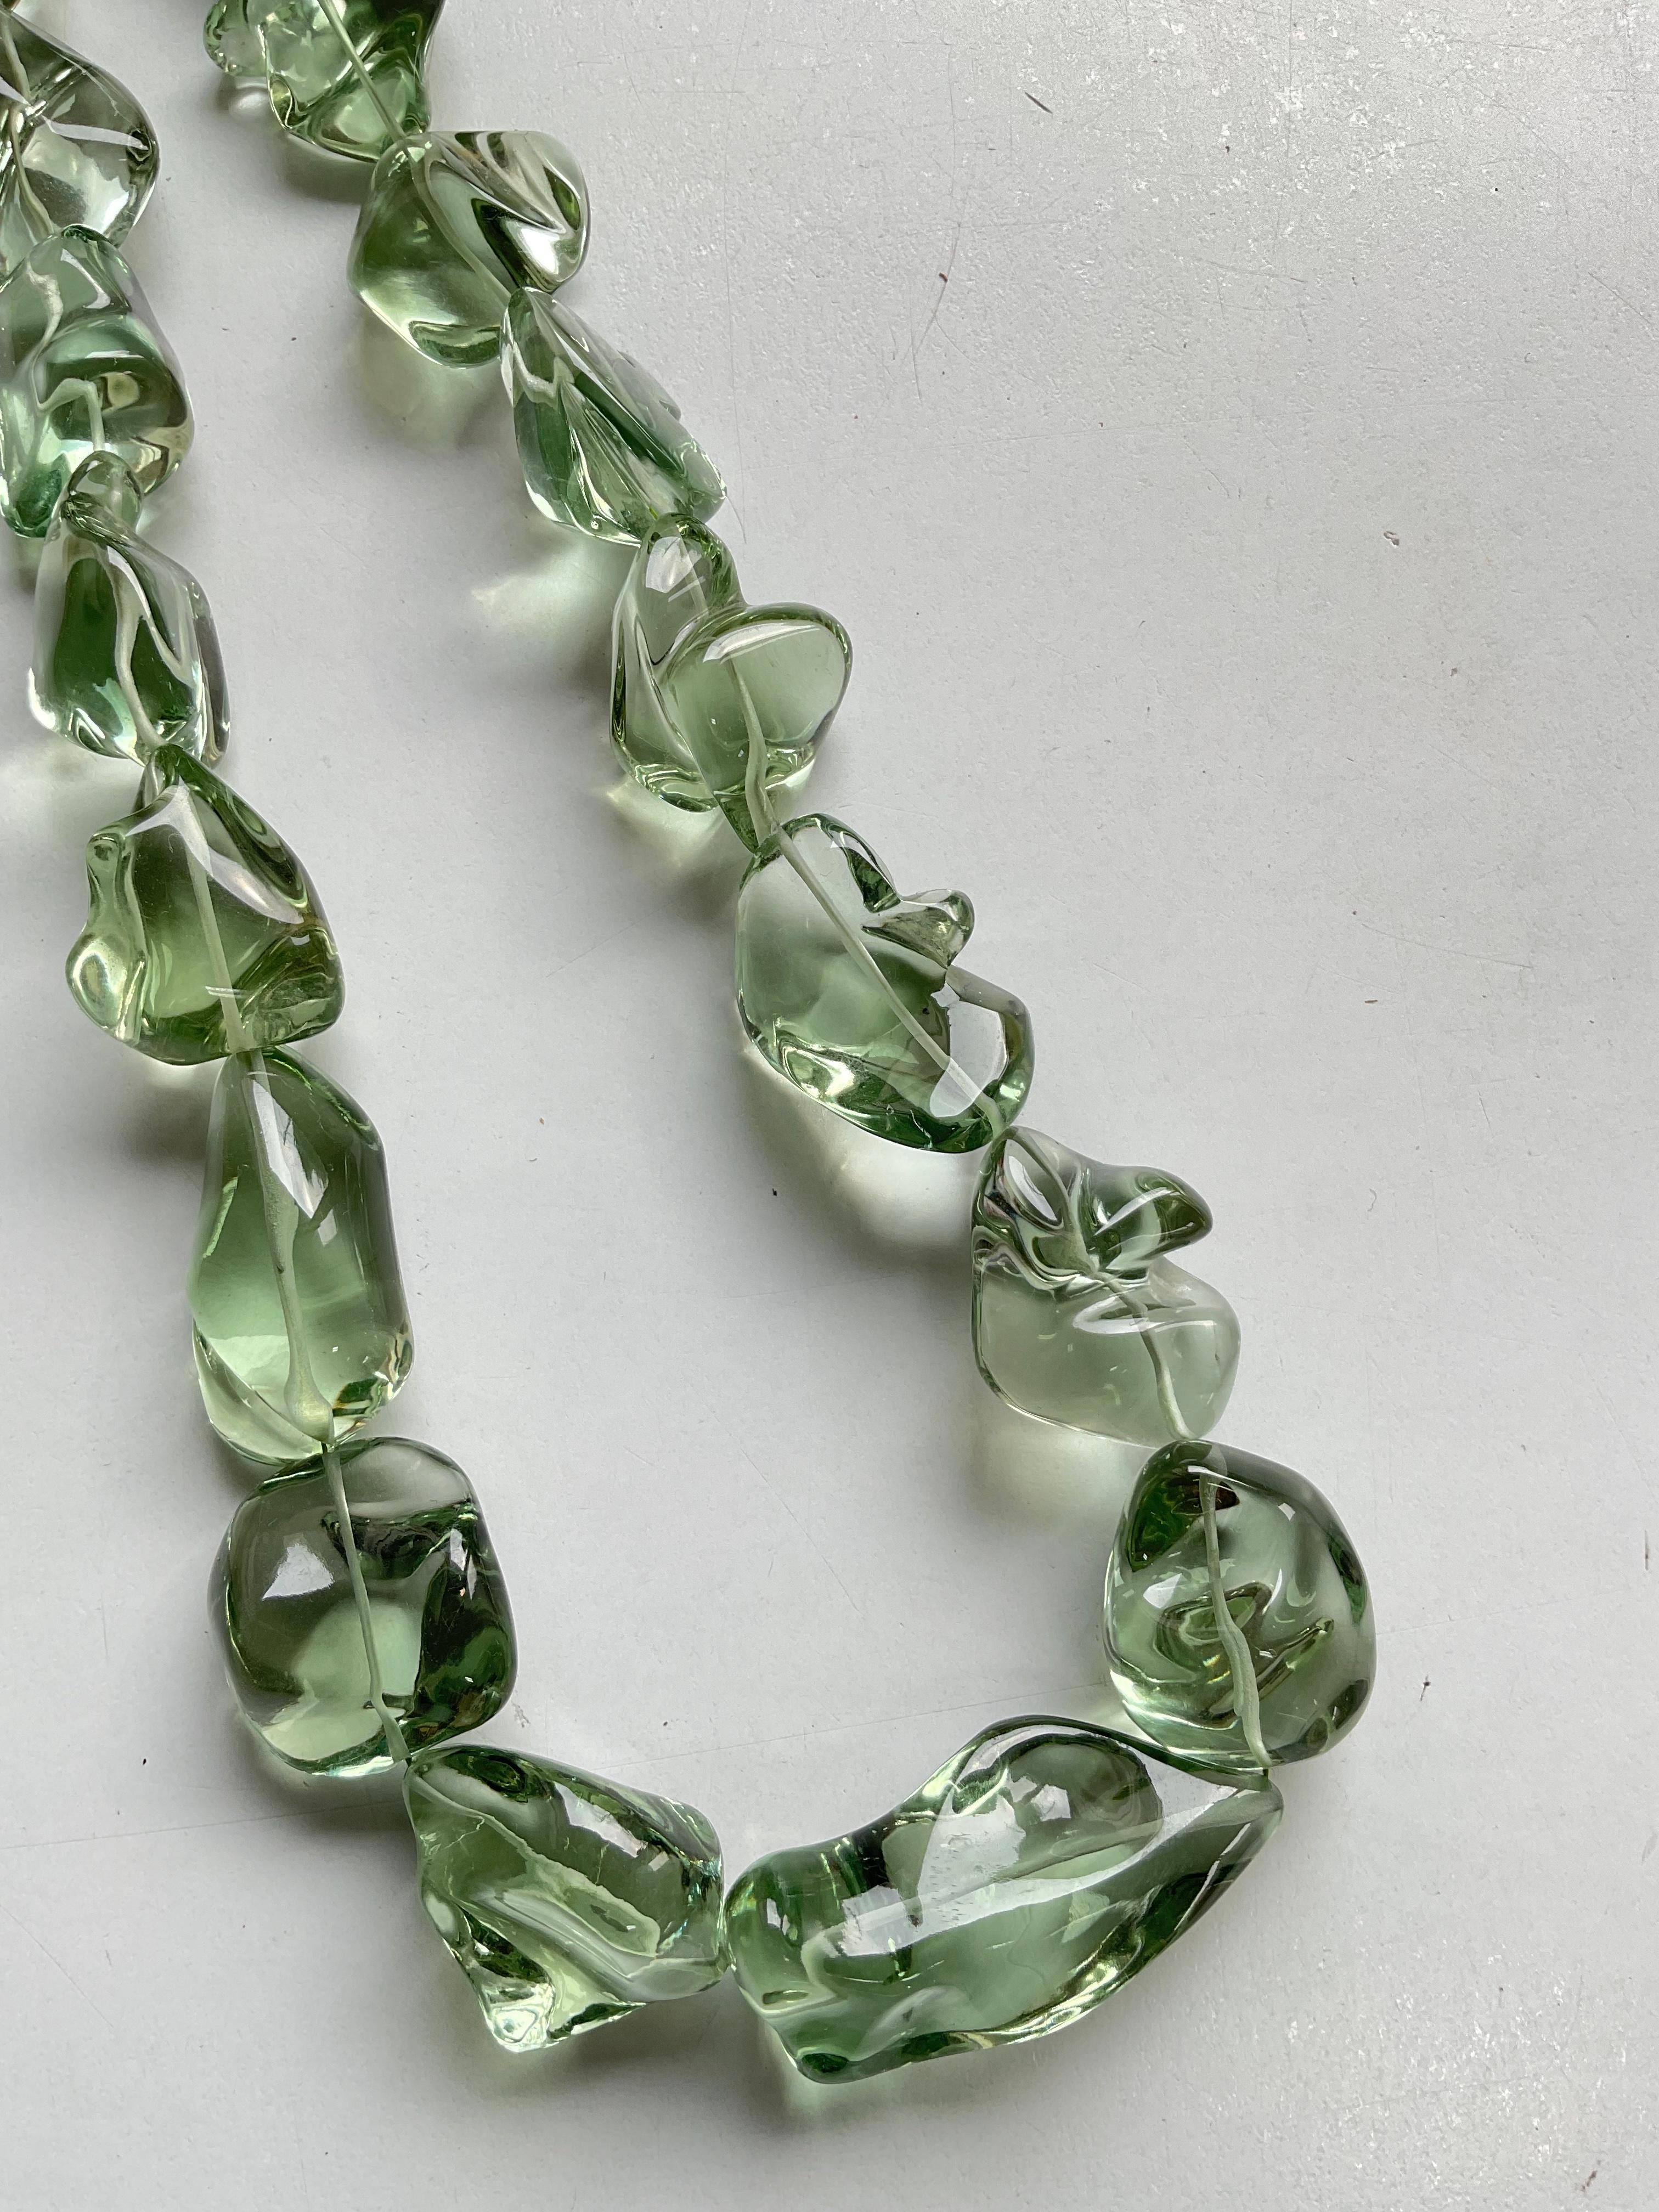 Prasiolite Green Amethyst Quartz Beaded Jewelry Necklace Gem Quality In New Condition For Sale In Jaipur, RJ